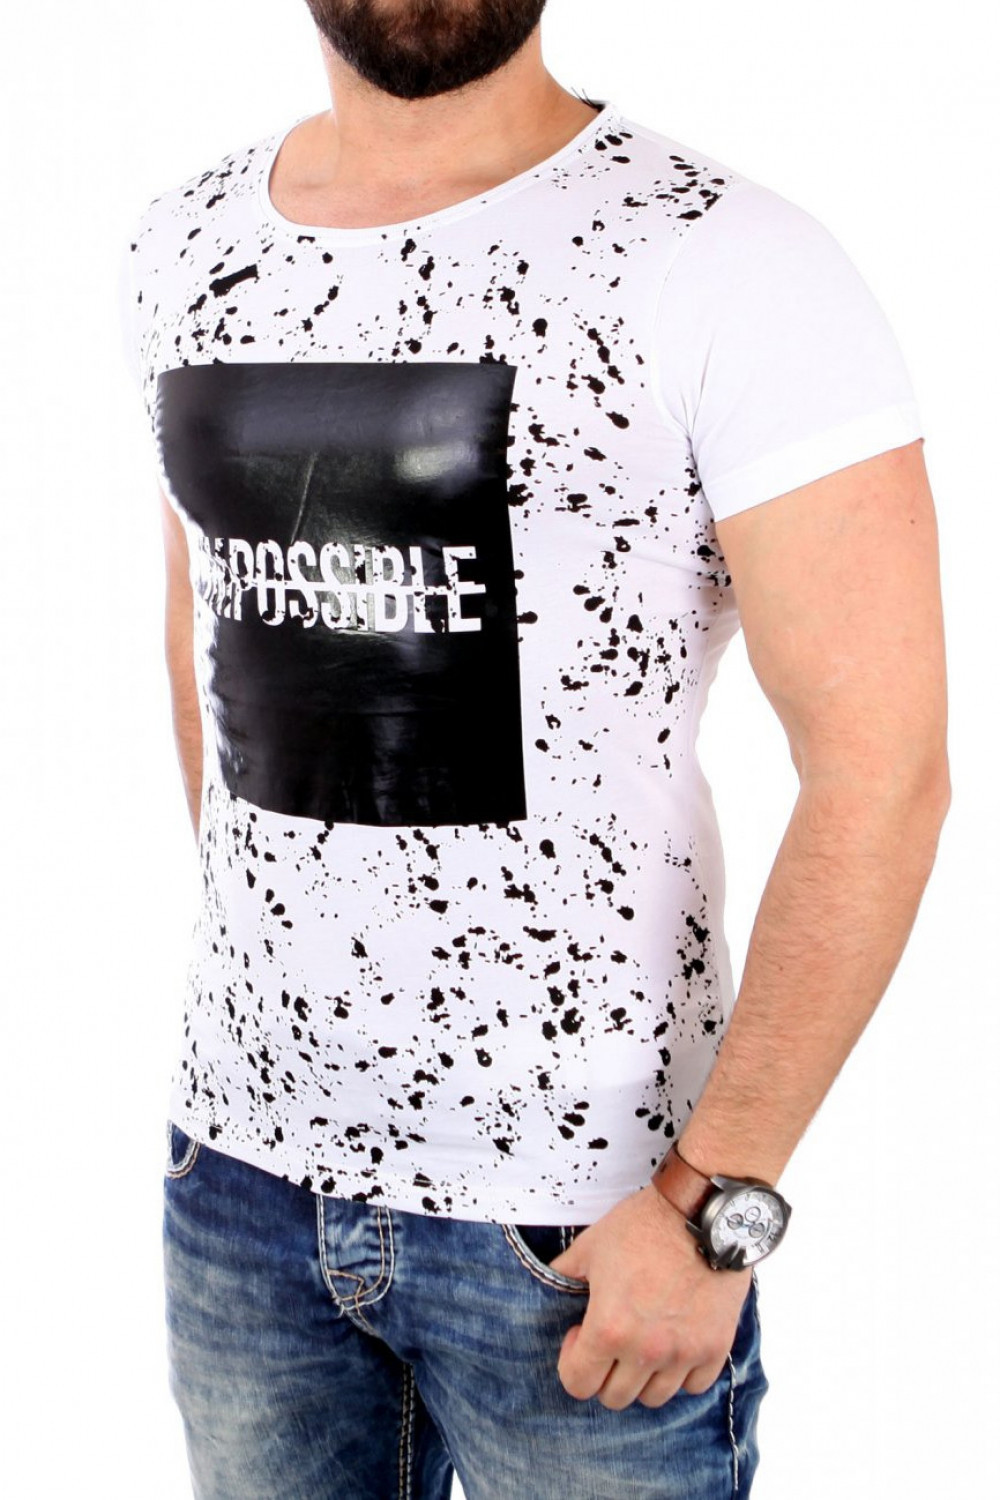 T-shirt model 61312 YourNewStyle L